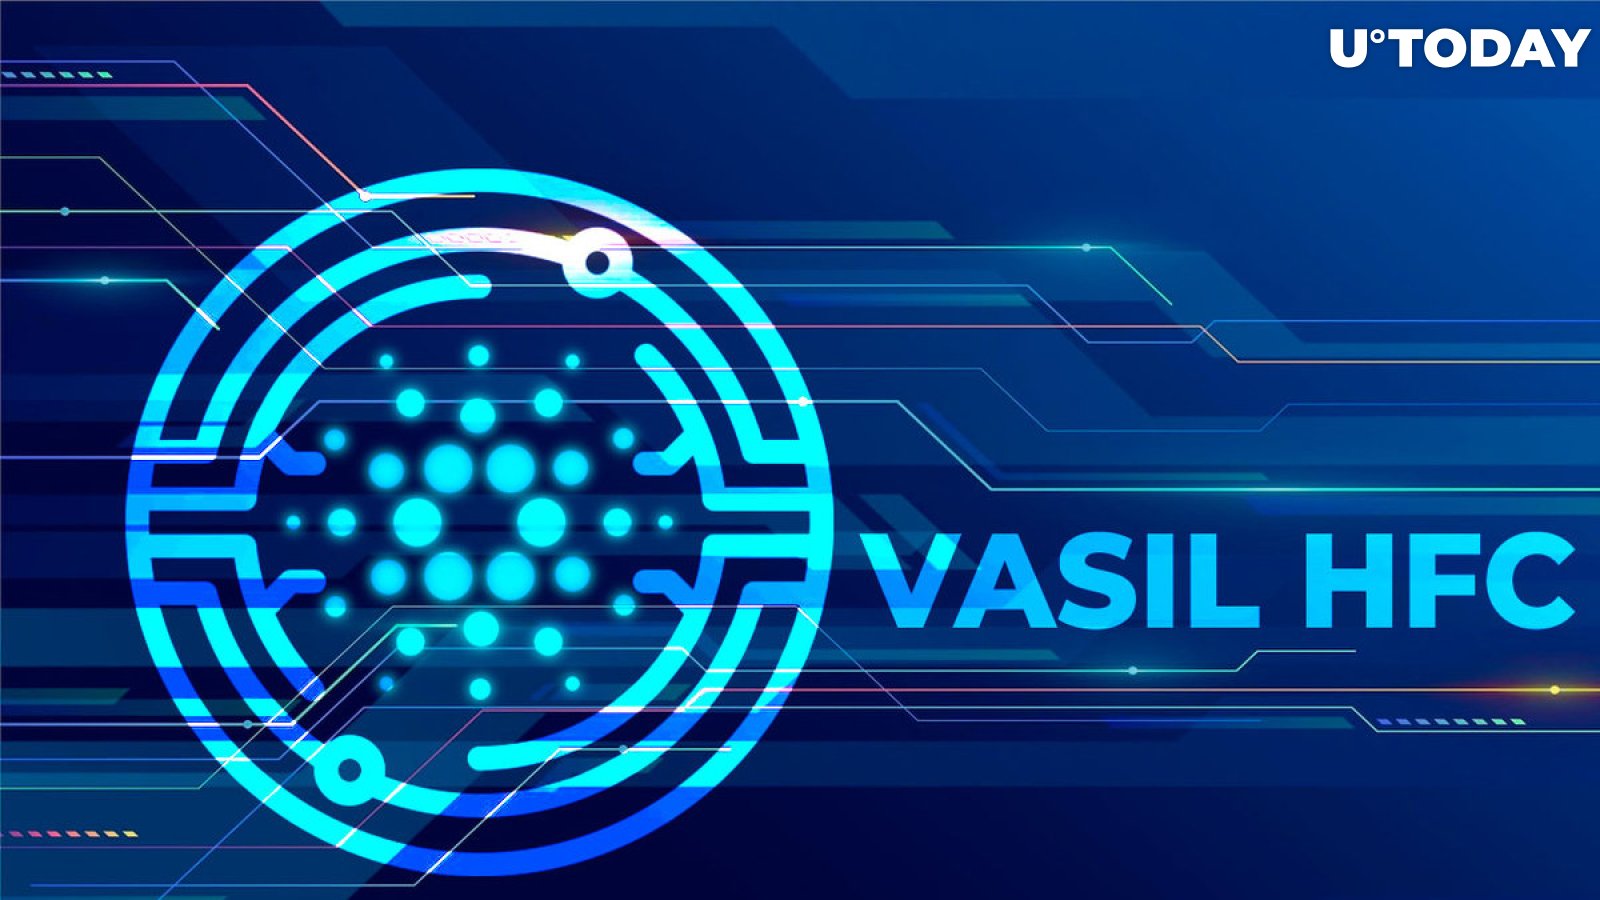 This Rare Cardano Smart Contract Usage Might Be Possible After Vasil HFC: Details